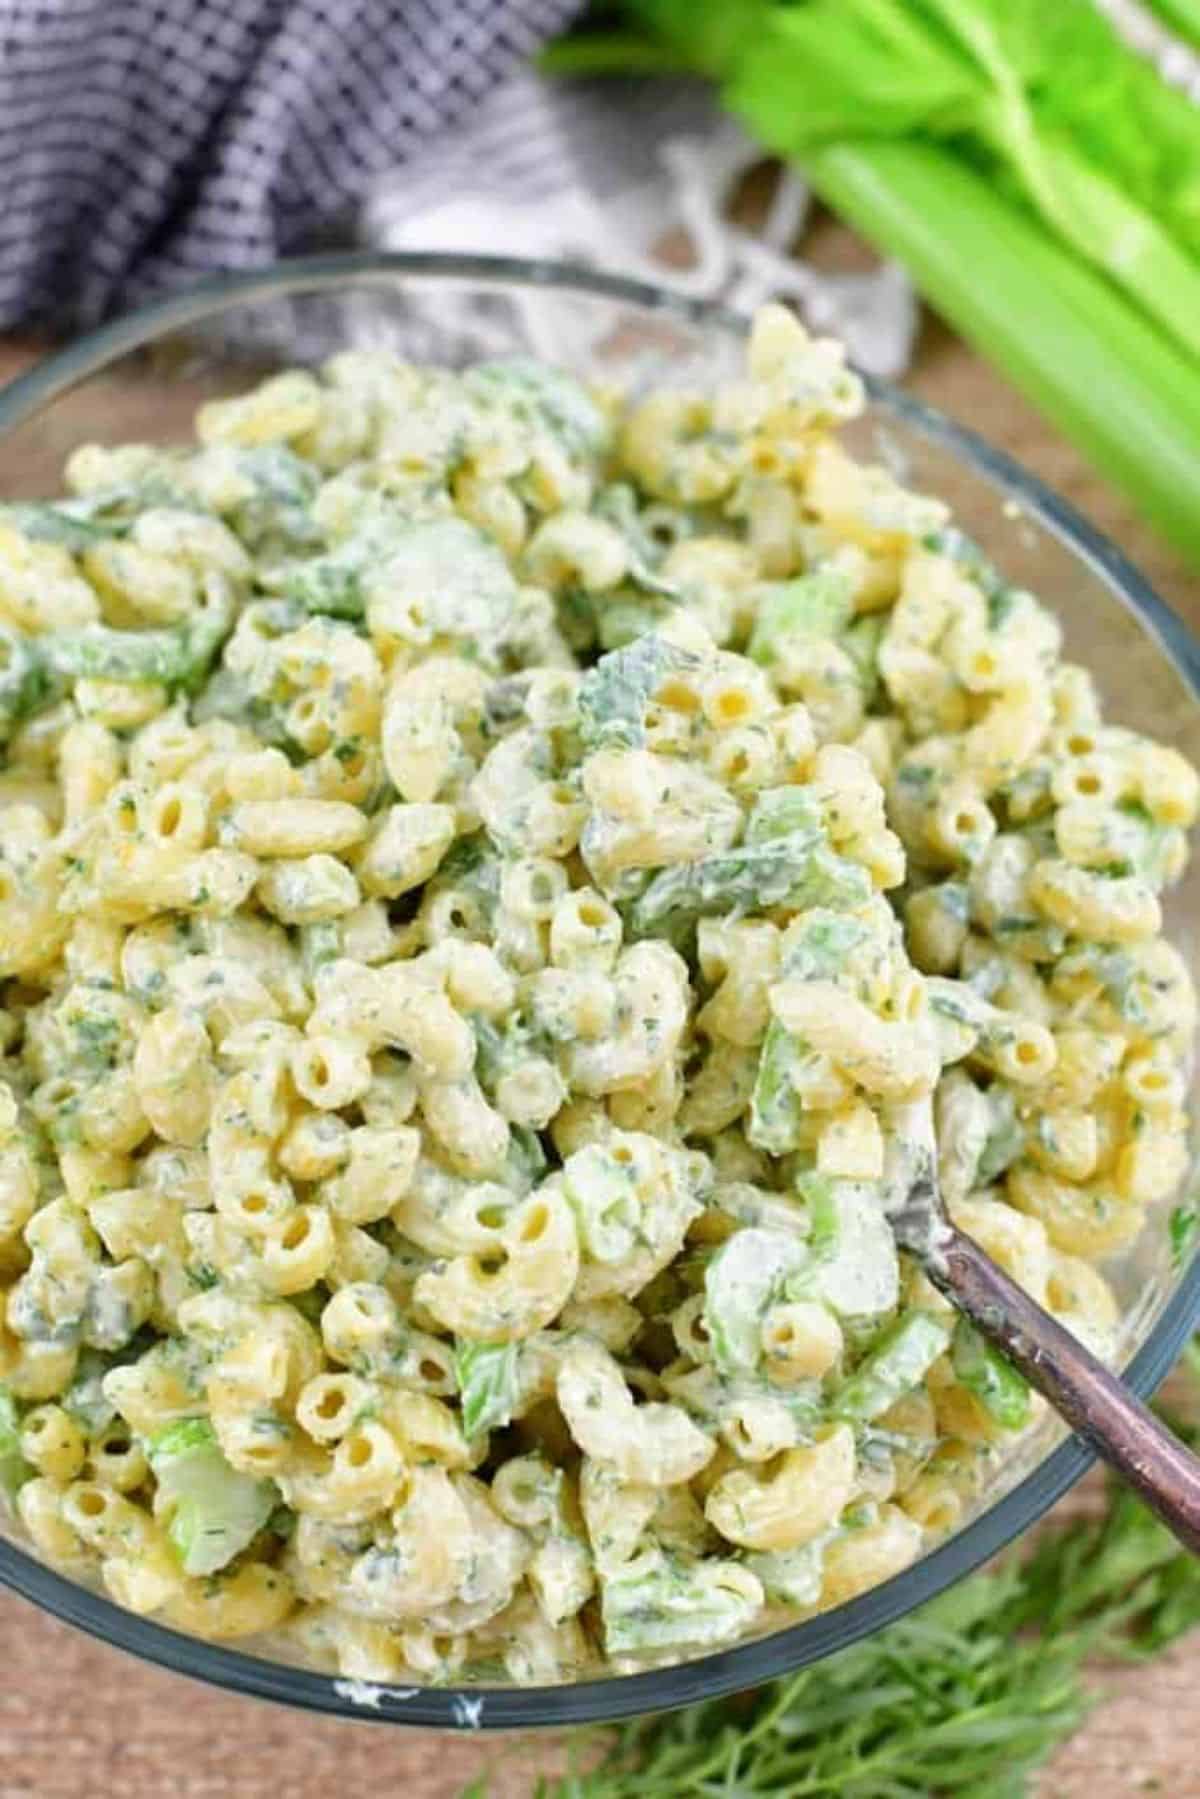 Green Goddess Macaroni Salad in a glass bowl with a spoon.